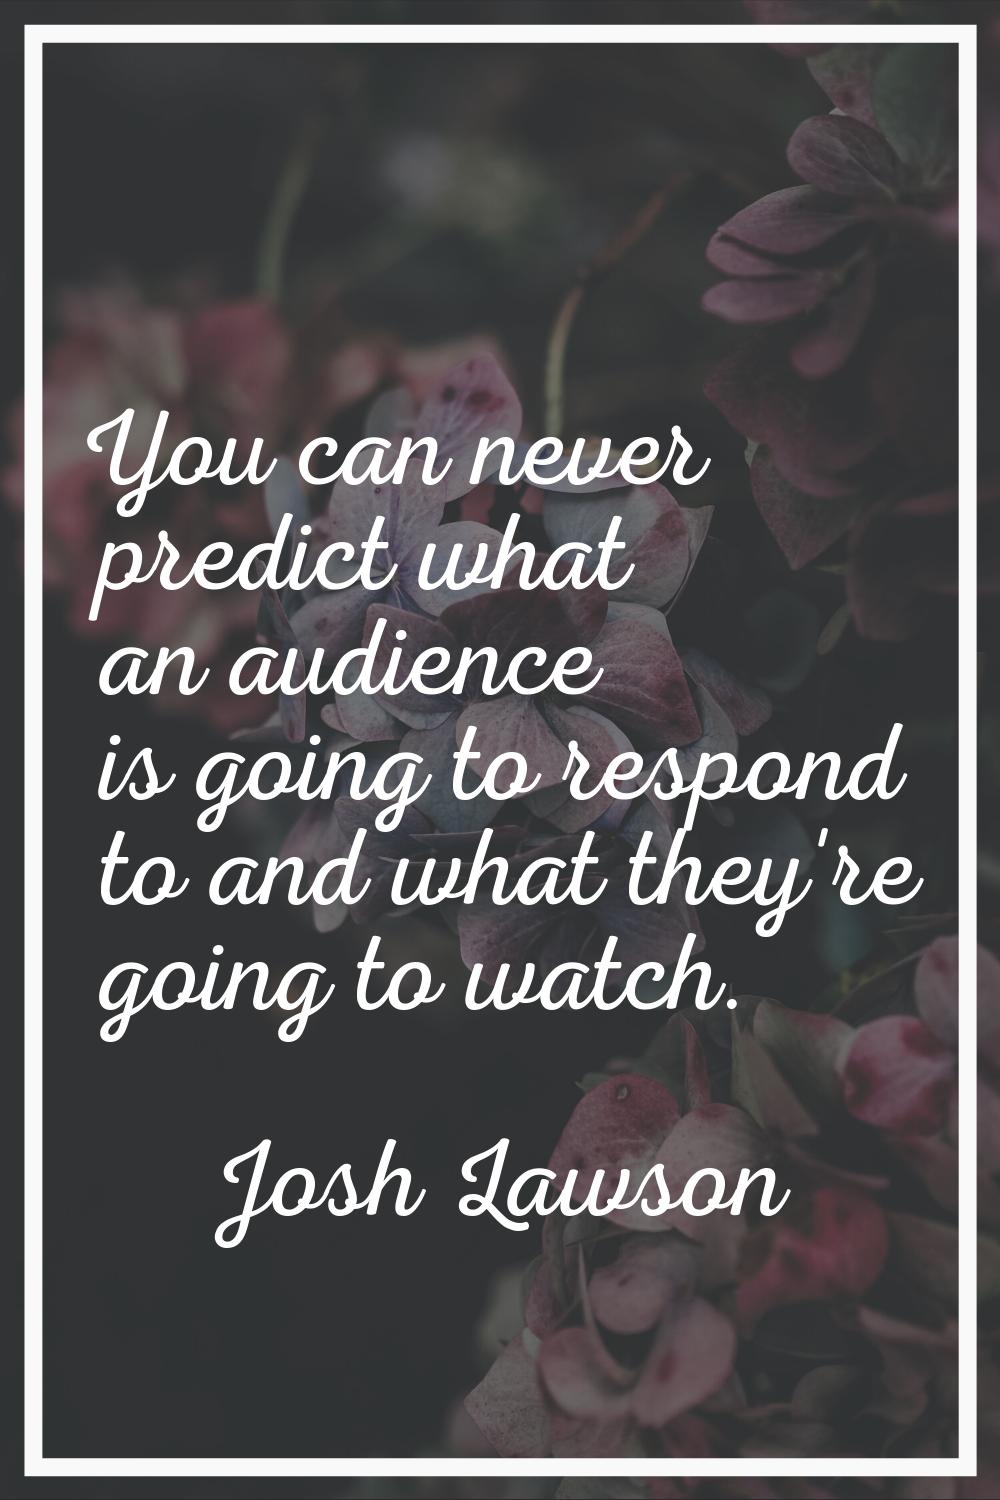 You can never predict what an audience is going to respond to and what they're going to watch.